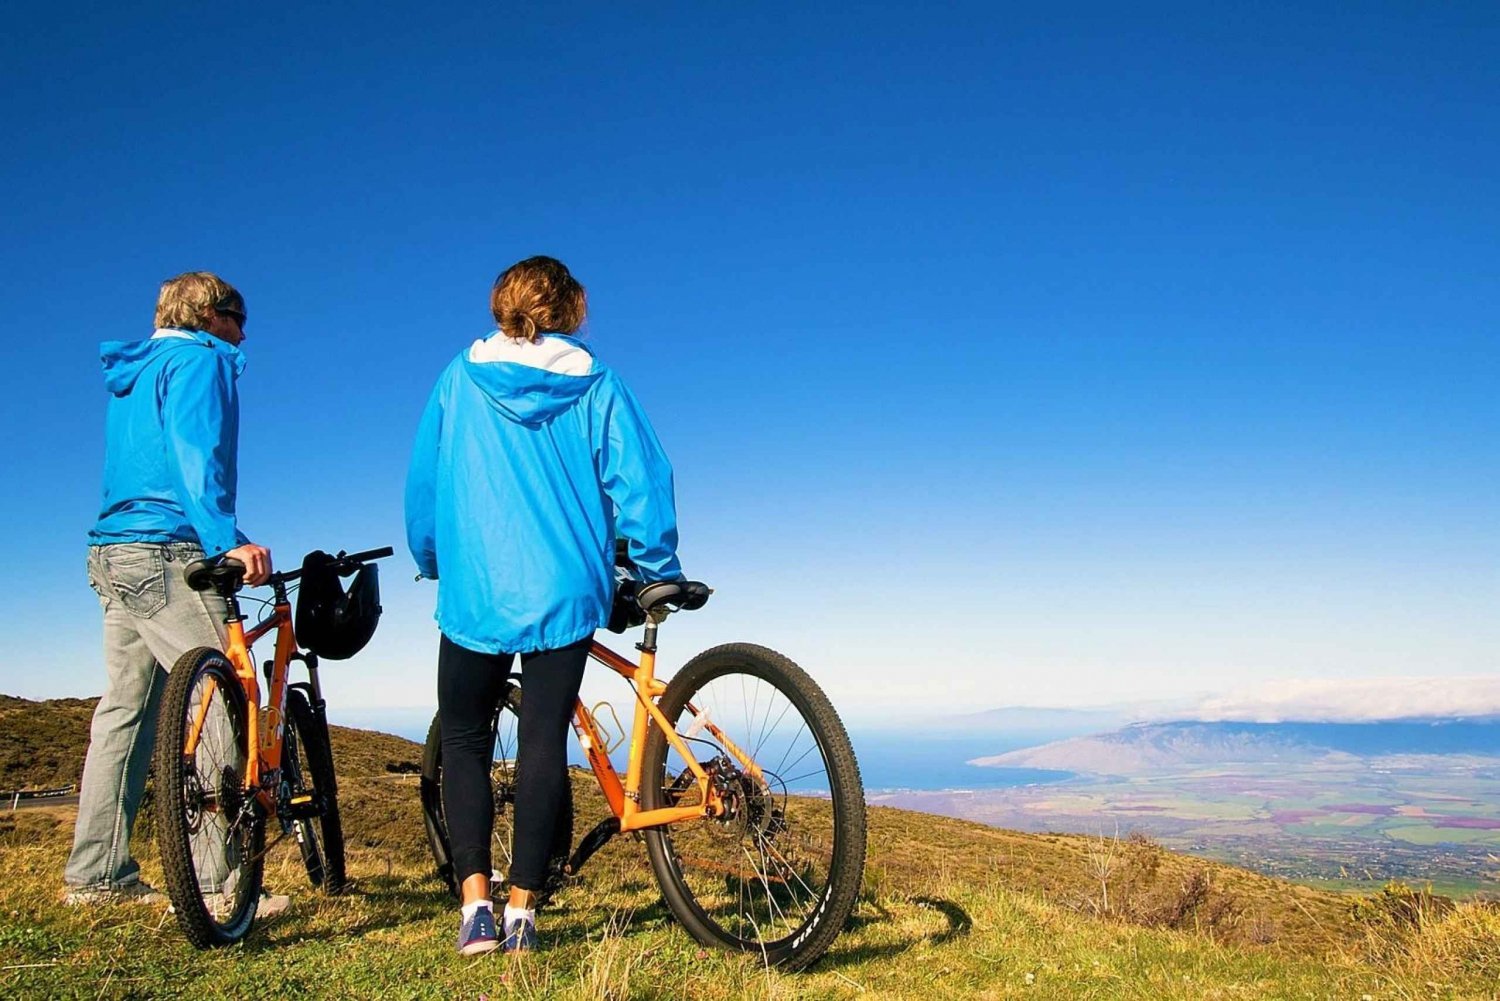 Maui's BEST Bike Rentals - Summit to Sea, Yes you Can!